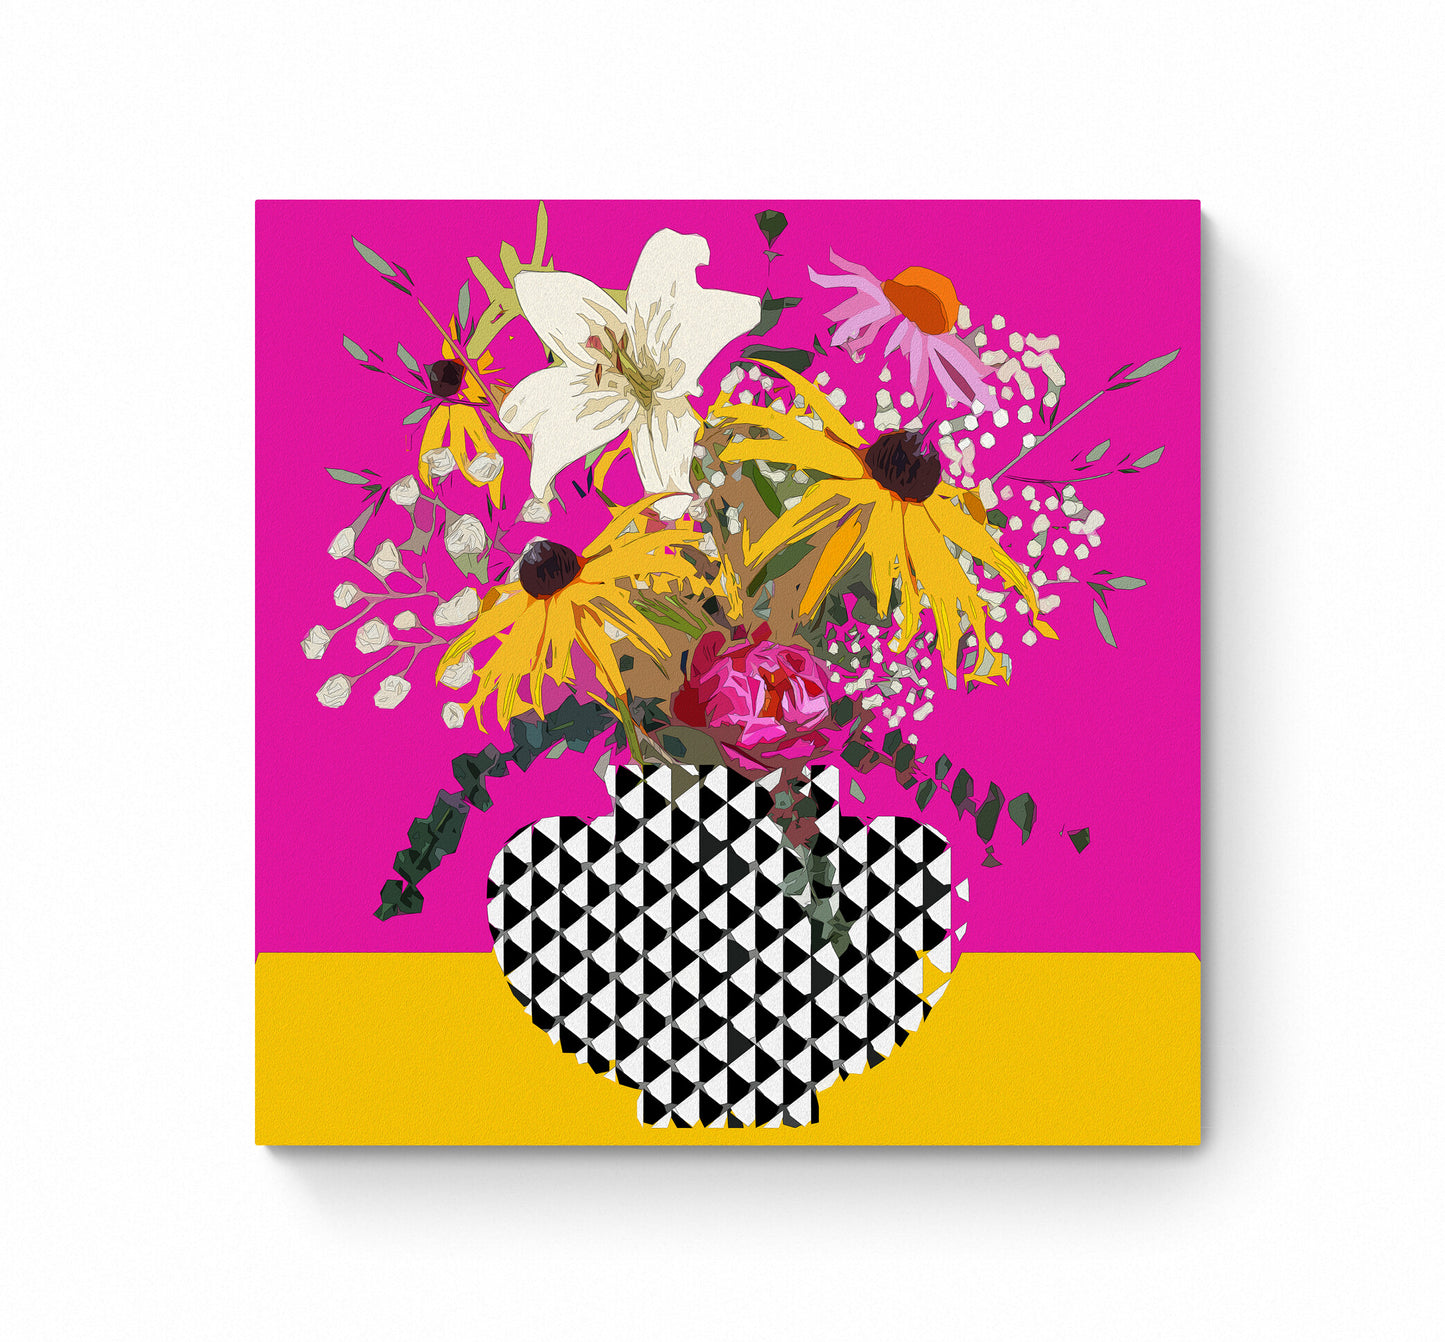 Vibrant Floral Wall Art Print on Stretched Canvas or Fine Art Paper